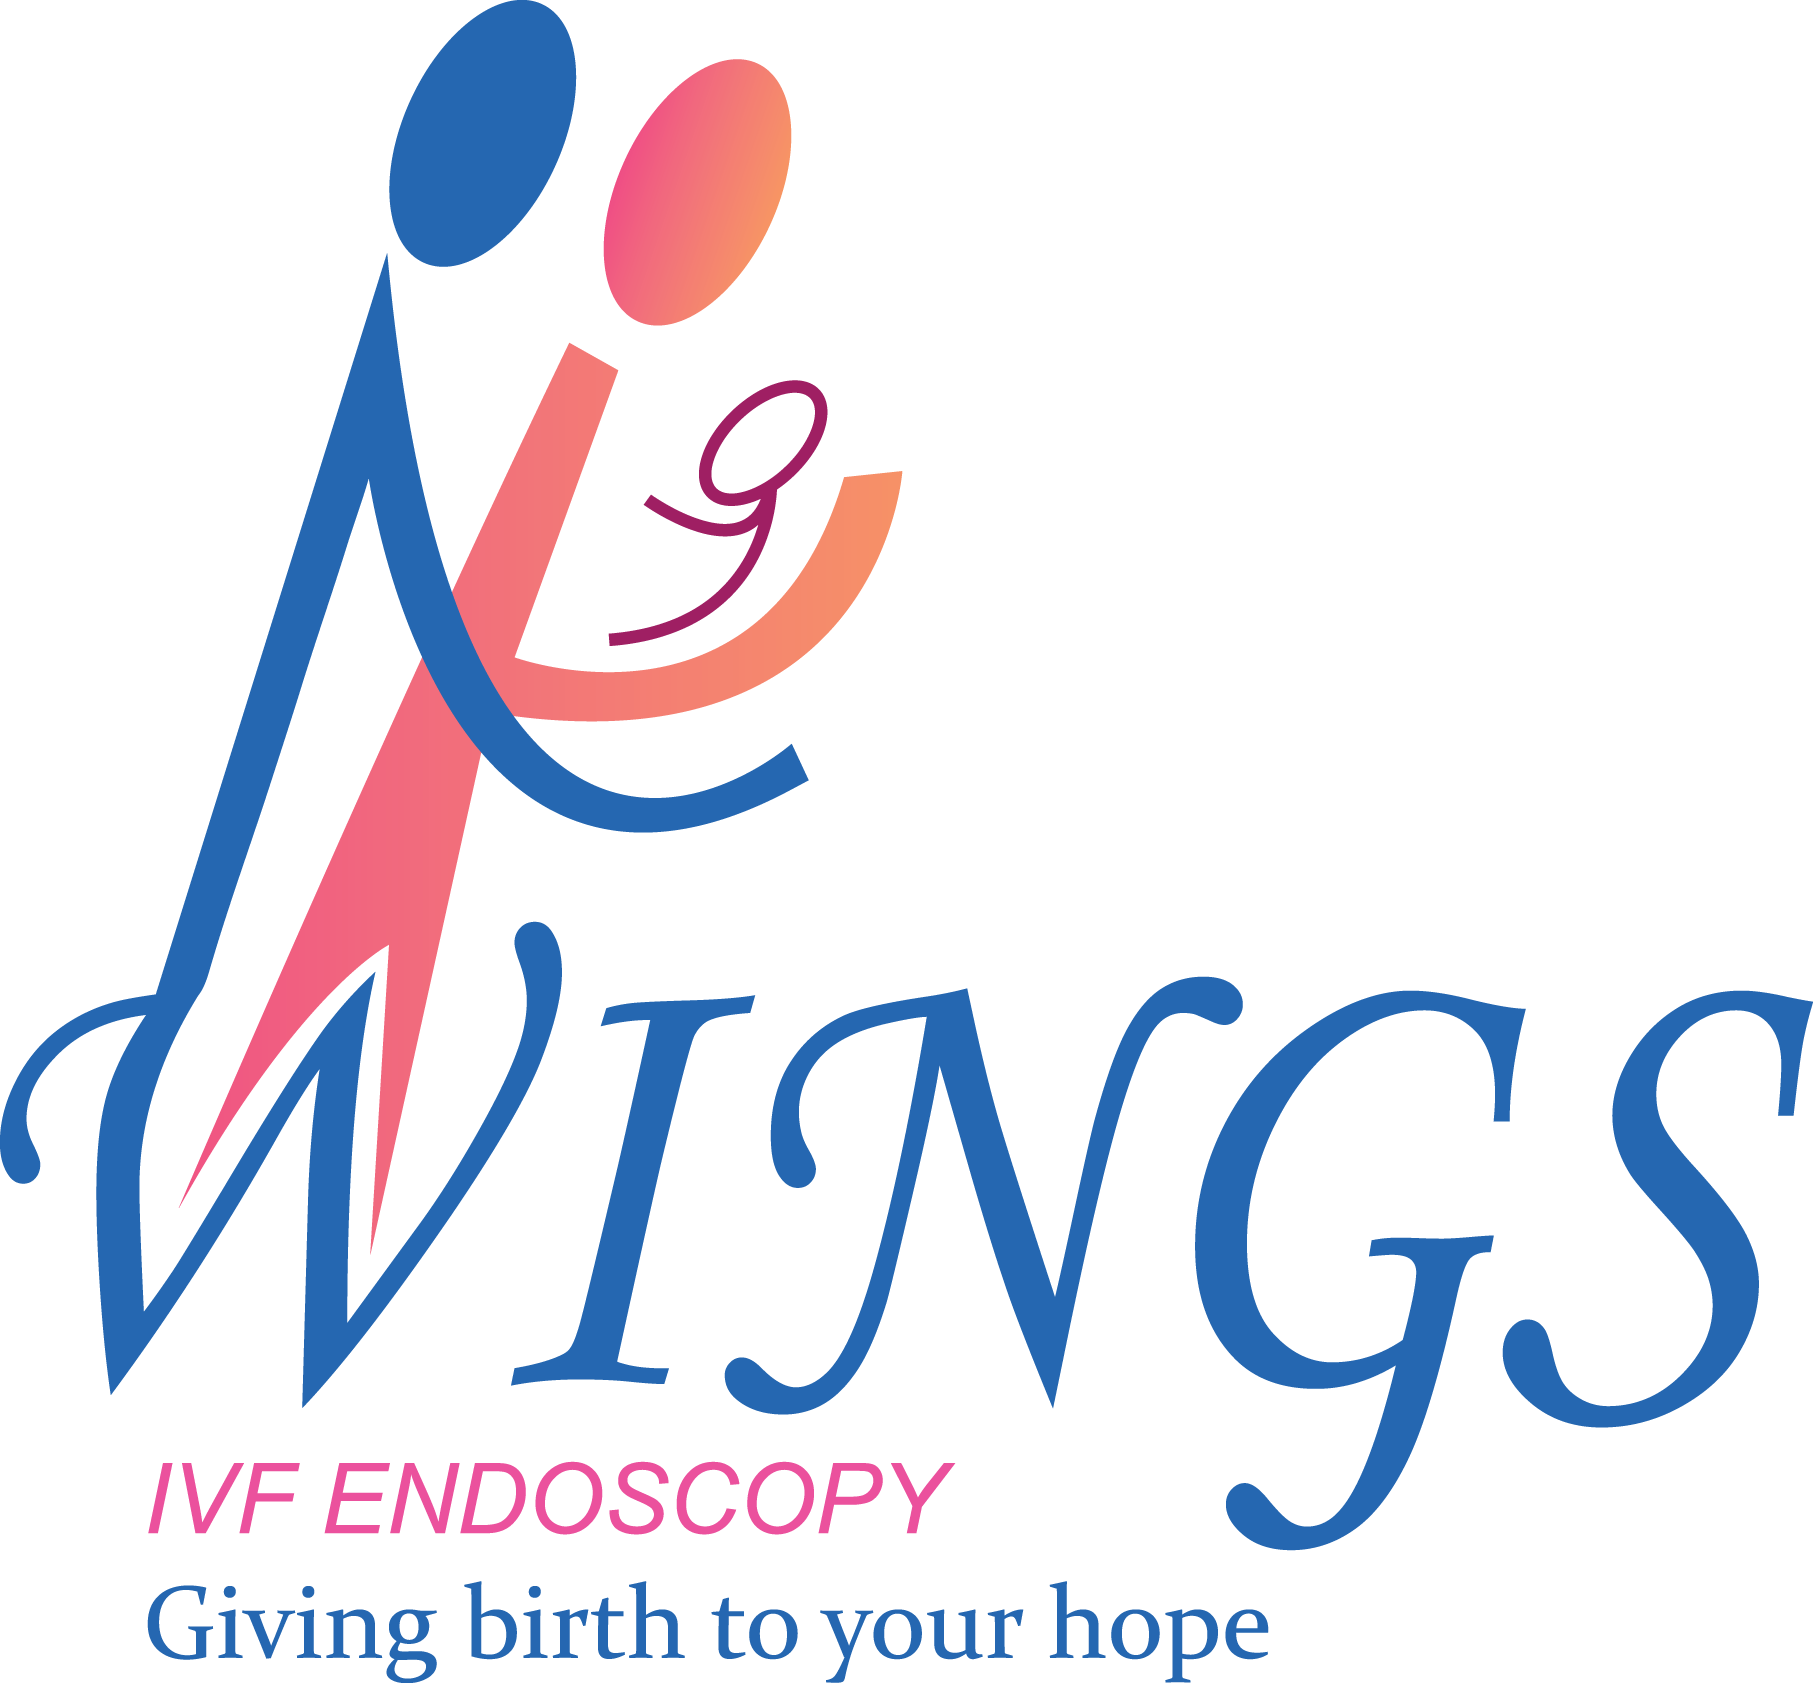 Wings Hospitals|Veterinary|Medical Services